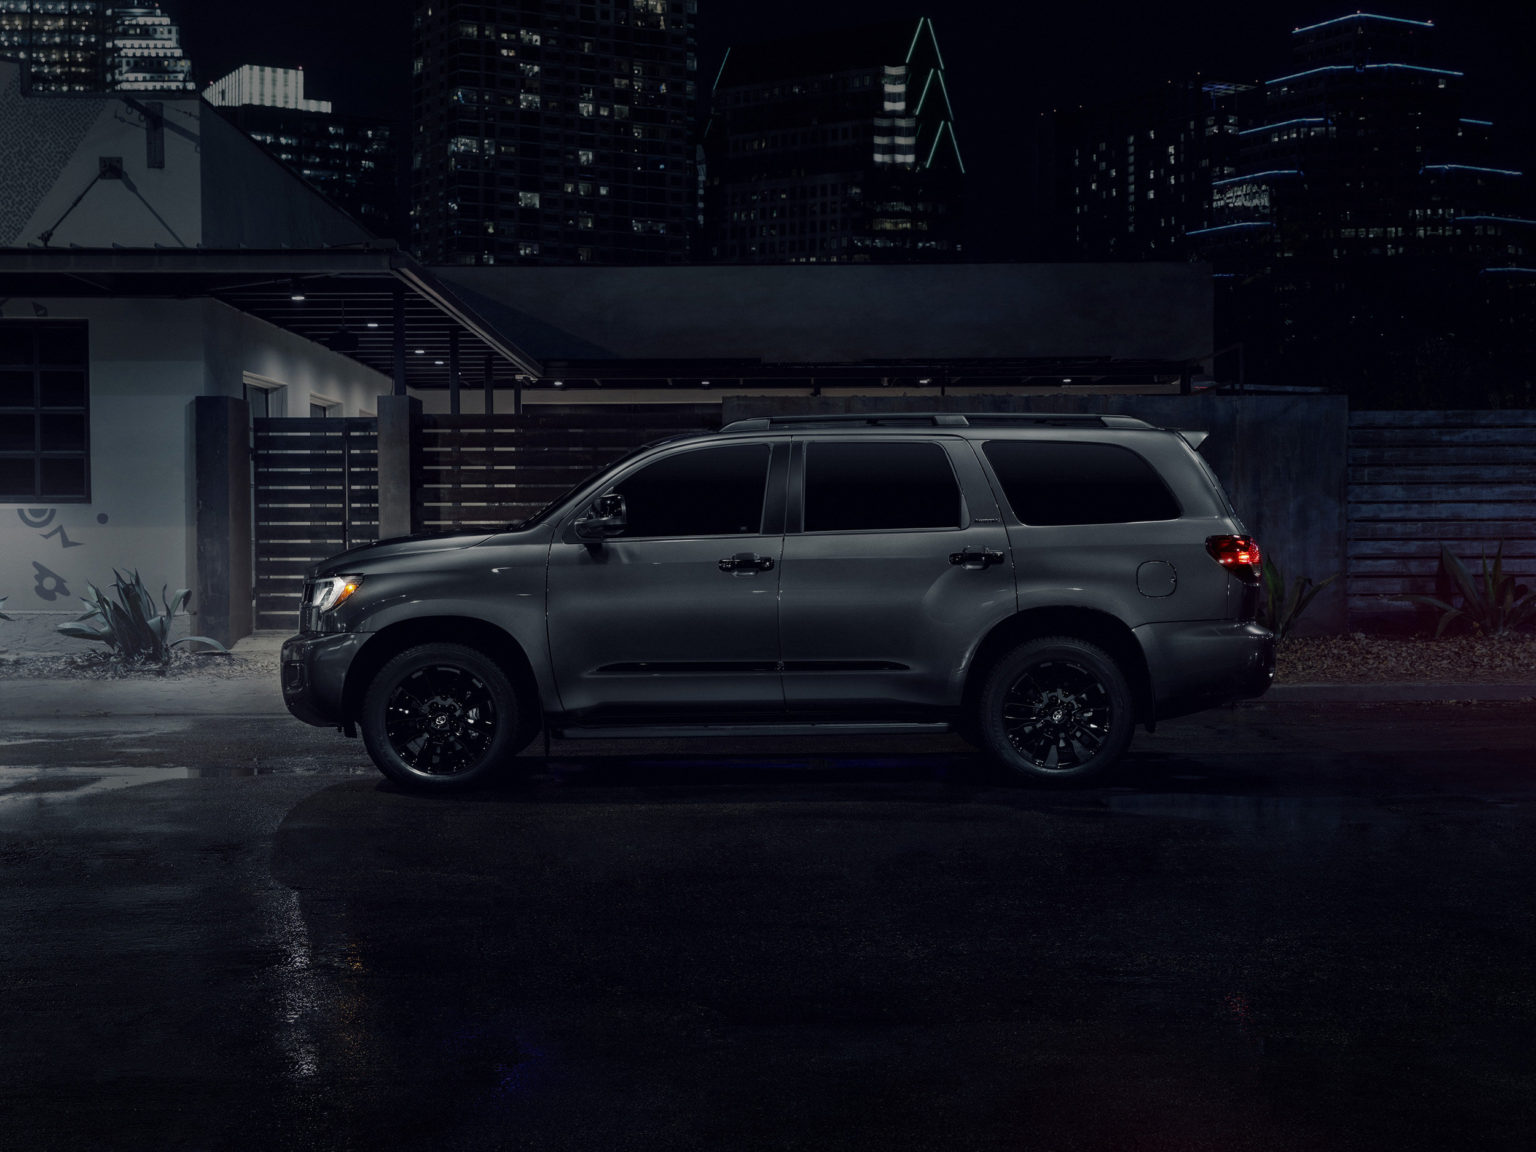 The Toyota Sequoia is getting more options for the 2021 model year.